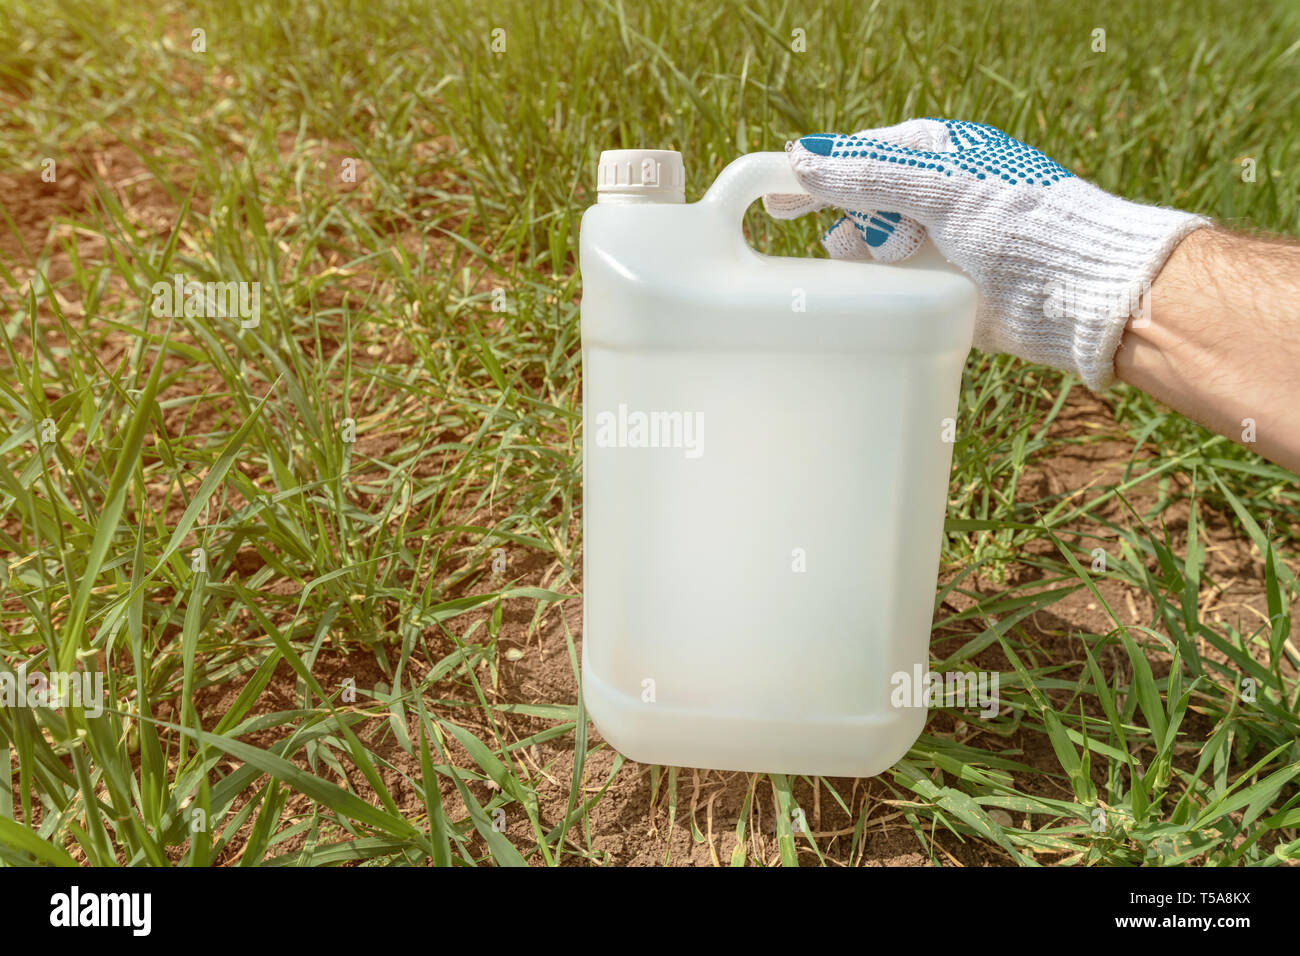 Farmer holding insecticide jug in wheatgrass field, blank plastic container for pesticide chemical as mock up Stock Photo